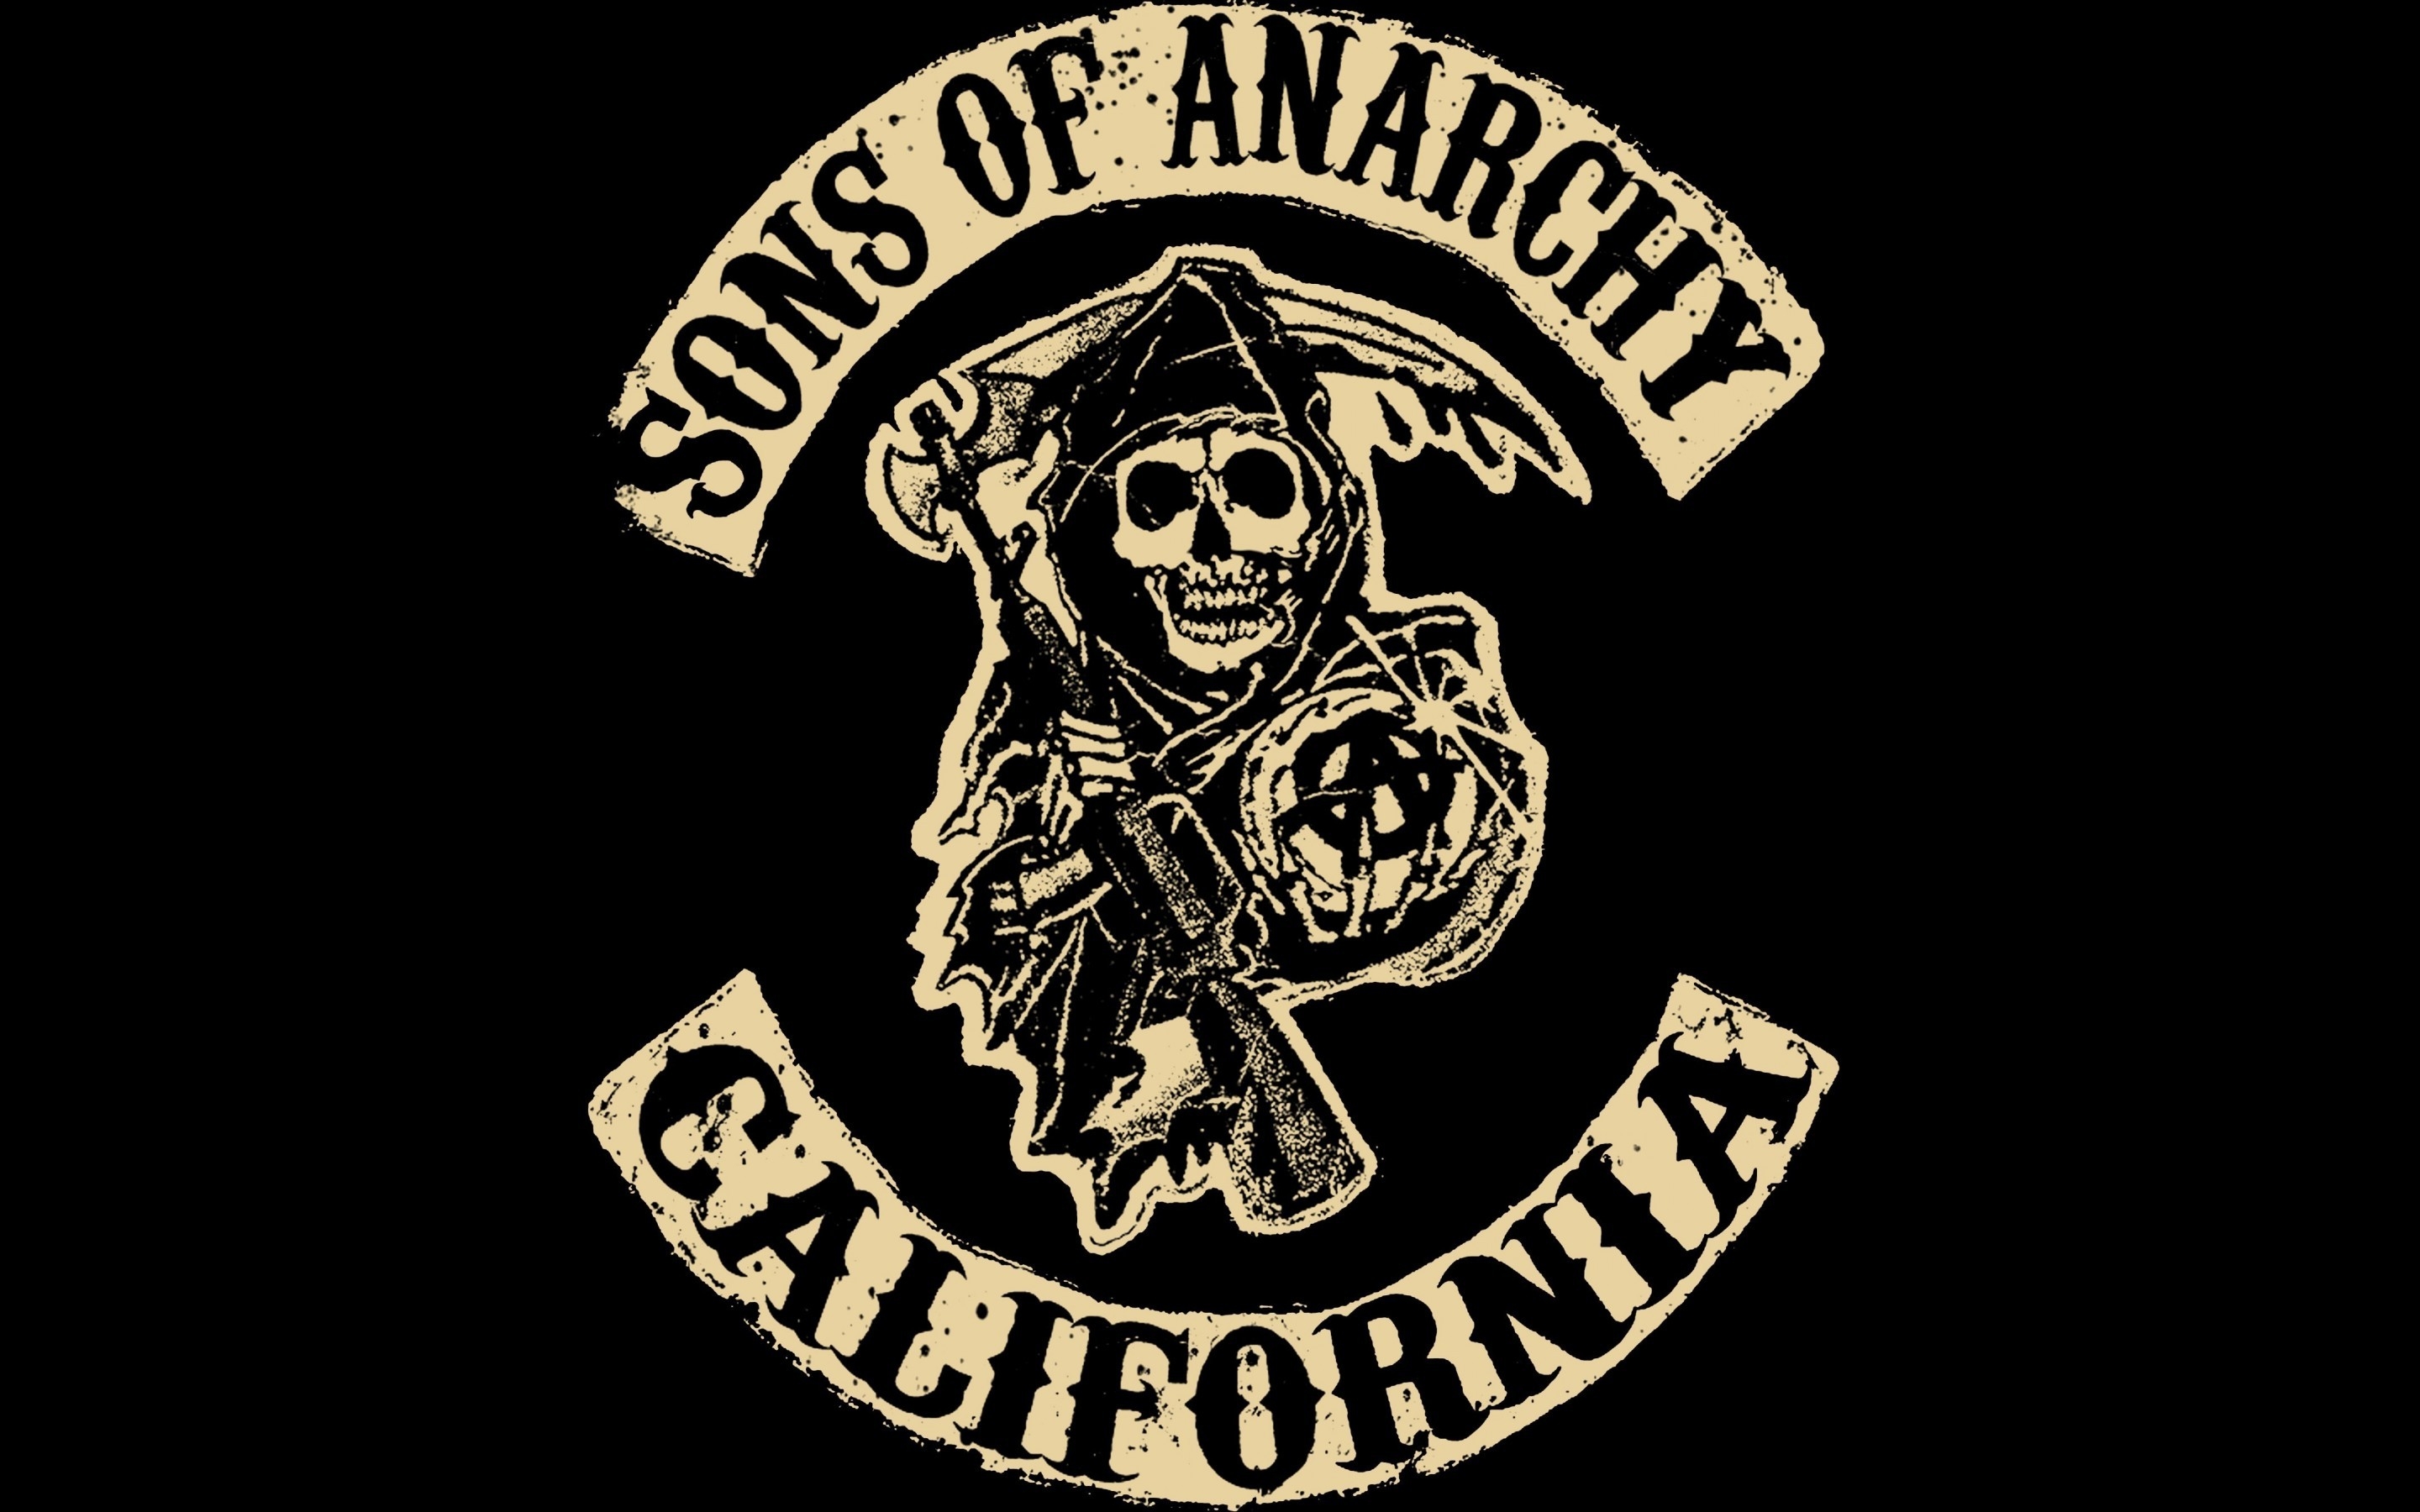 Sons of Anarchy Logo for 2880 x 1800 Retina Display resolution